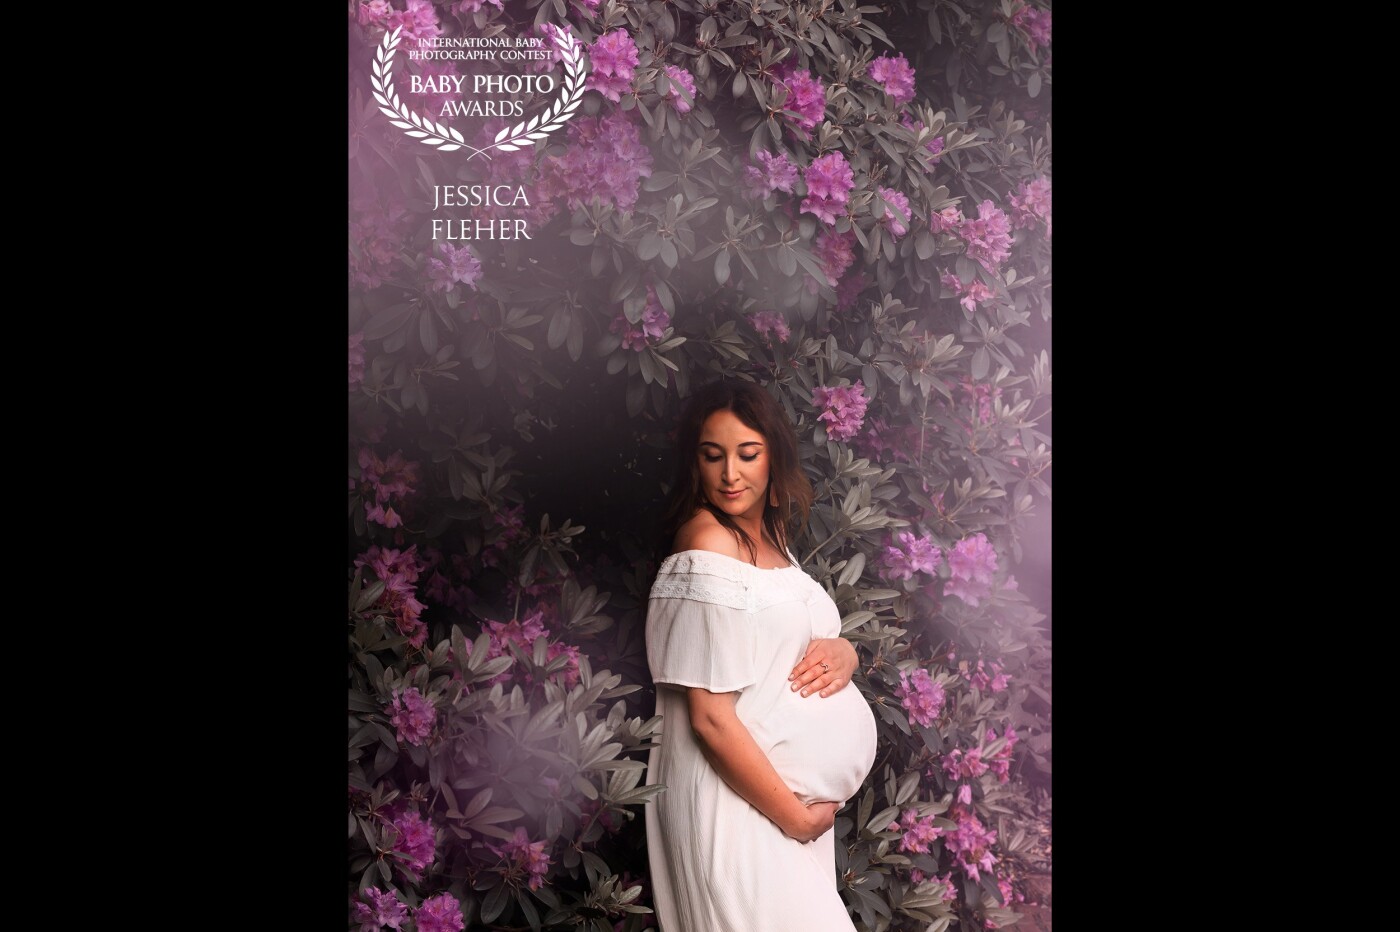 This beautiful woman is pregnant for the third time and with her wonderfully easy manner brings very light magic into every photo. The shooting was so easy and so much fun! To give a new life<br />
means giving completely unconditional & selfless love. J. Fleher